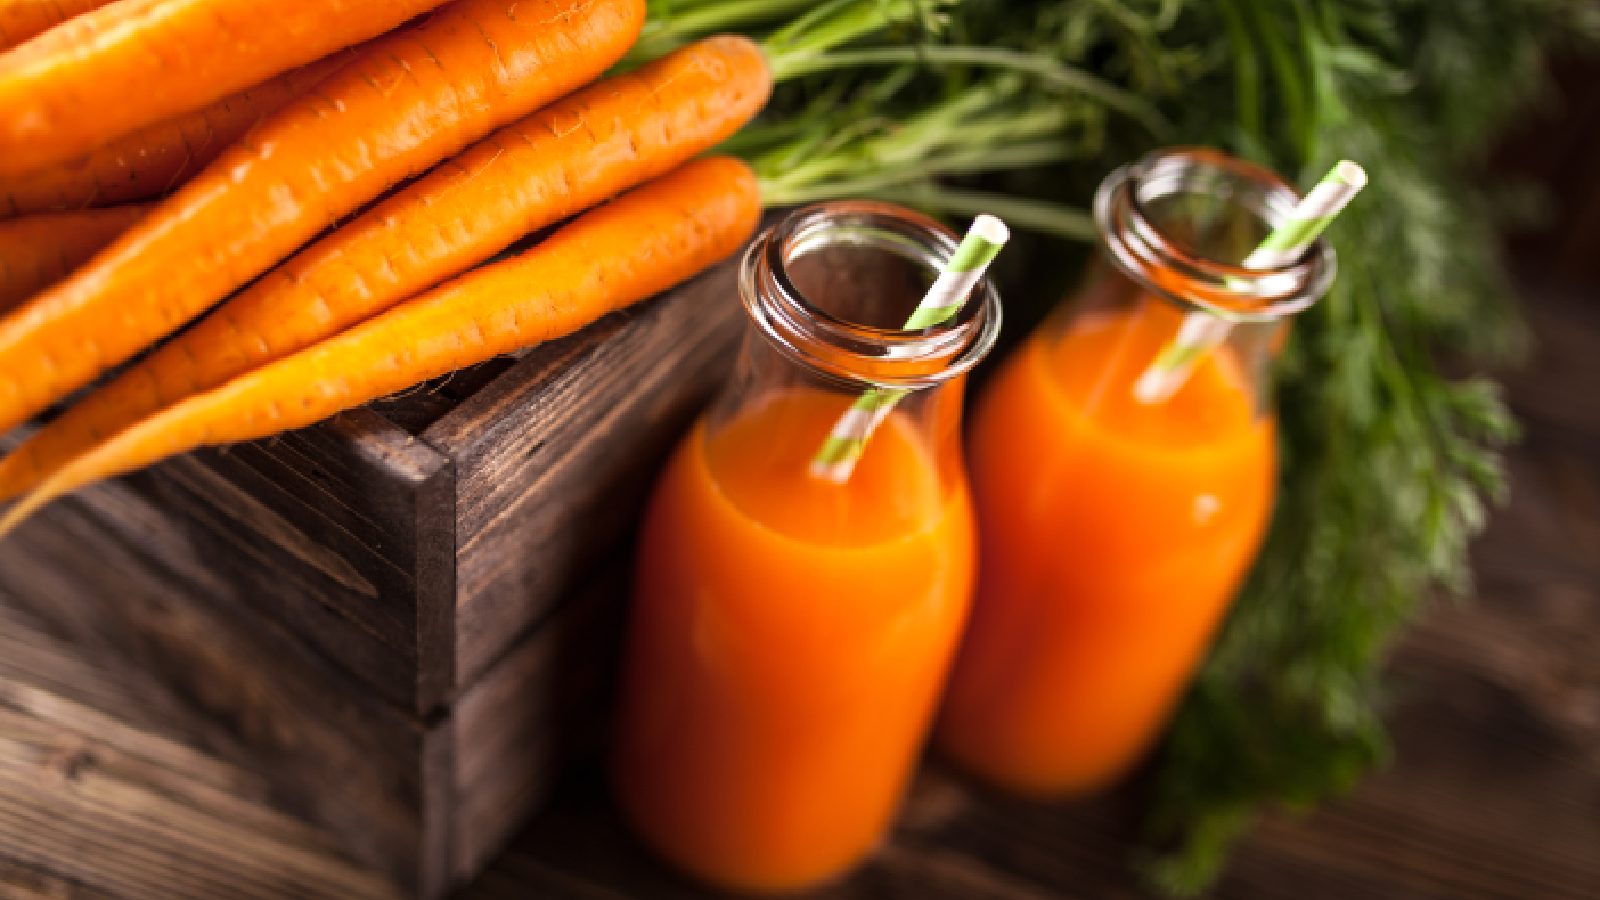 Carrots can help relieve hair loss and dandruff. Know the correct way to use